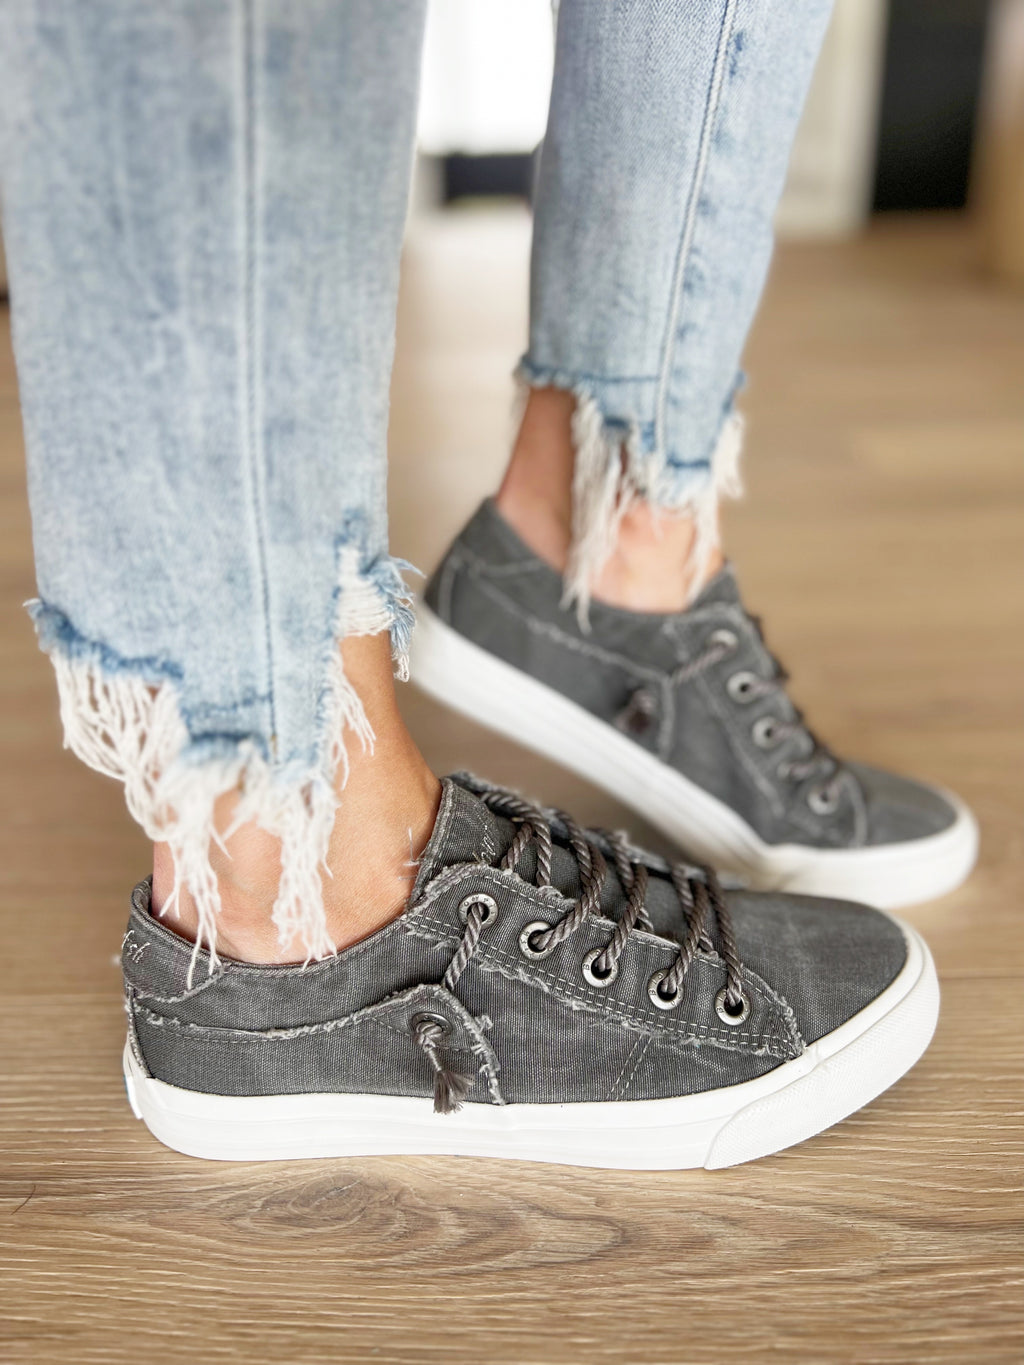 Blowfish Enjoy The Journey Sneakers in Storm Gray